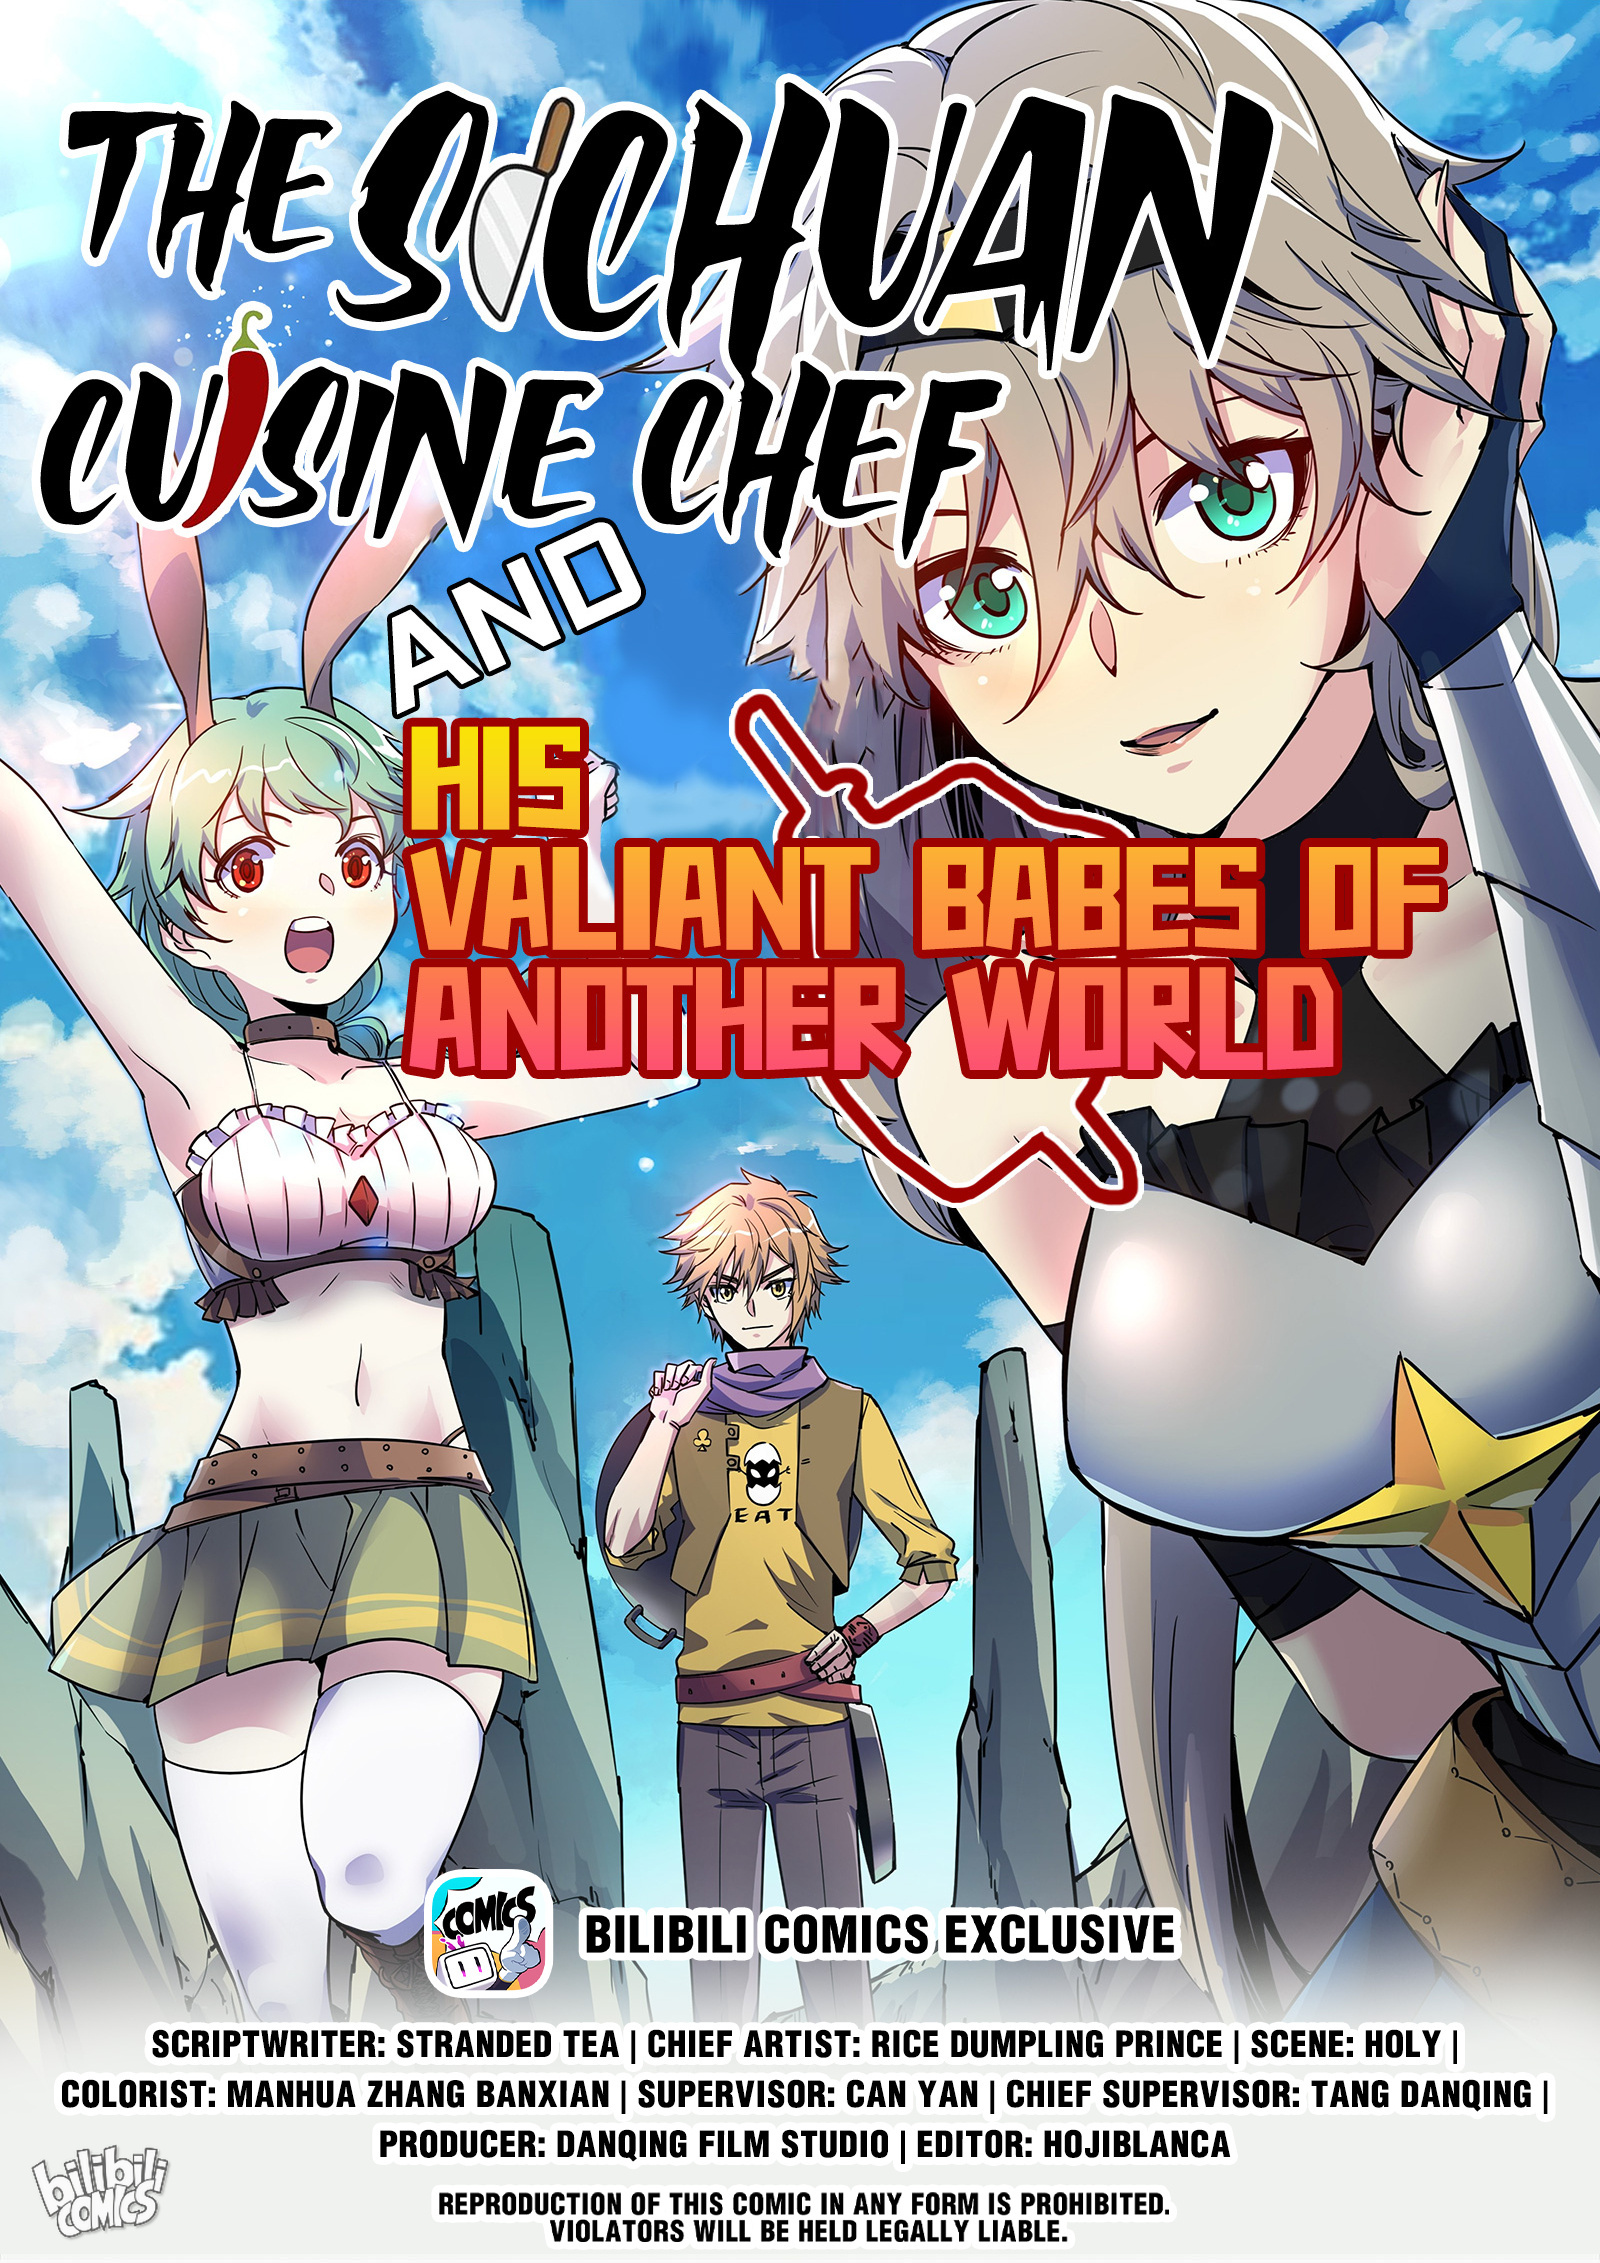 The Sichuan Cuisine Chef And His Valiant Babes Of Another World - Page 1